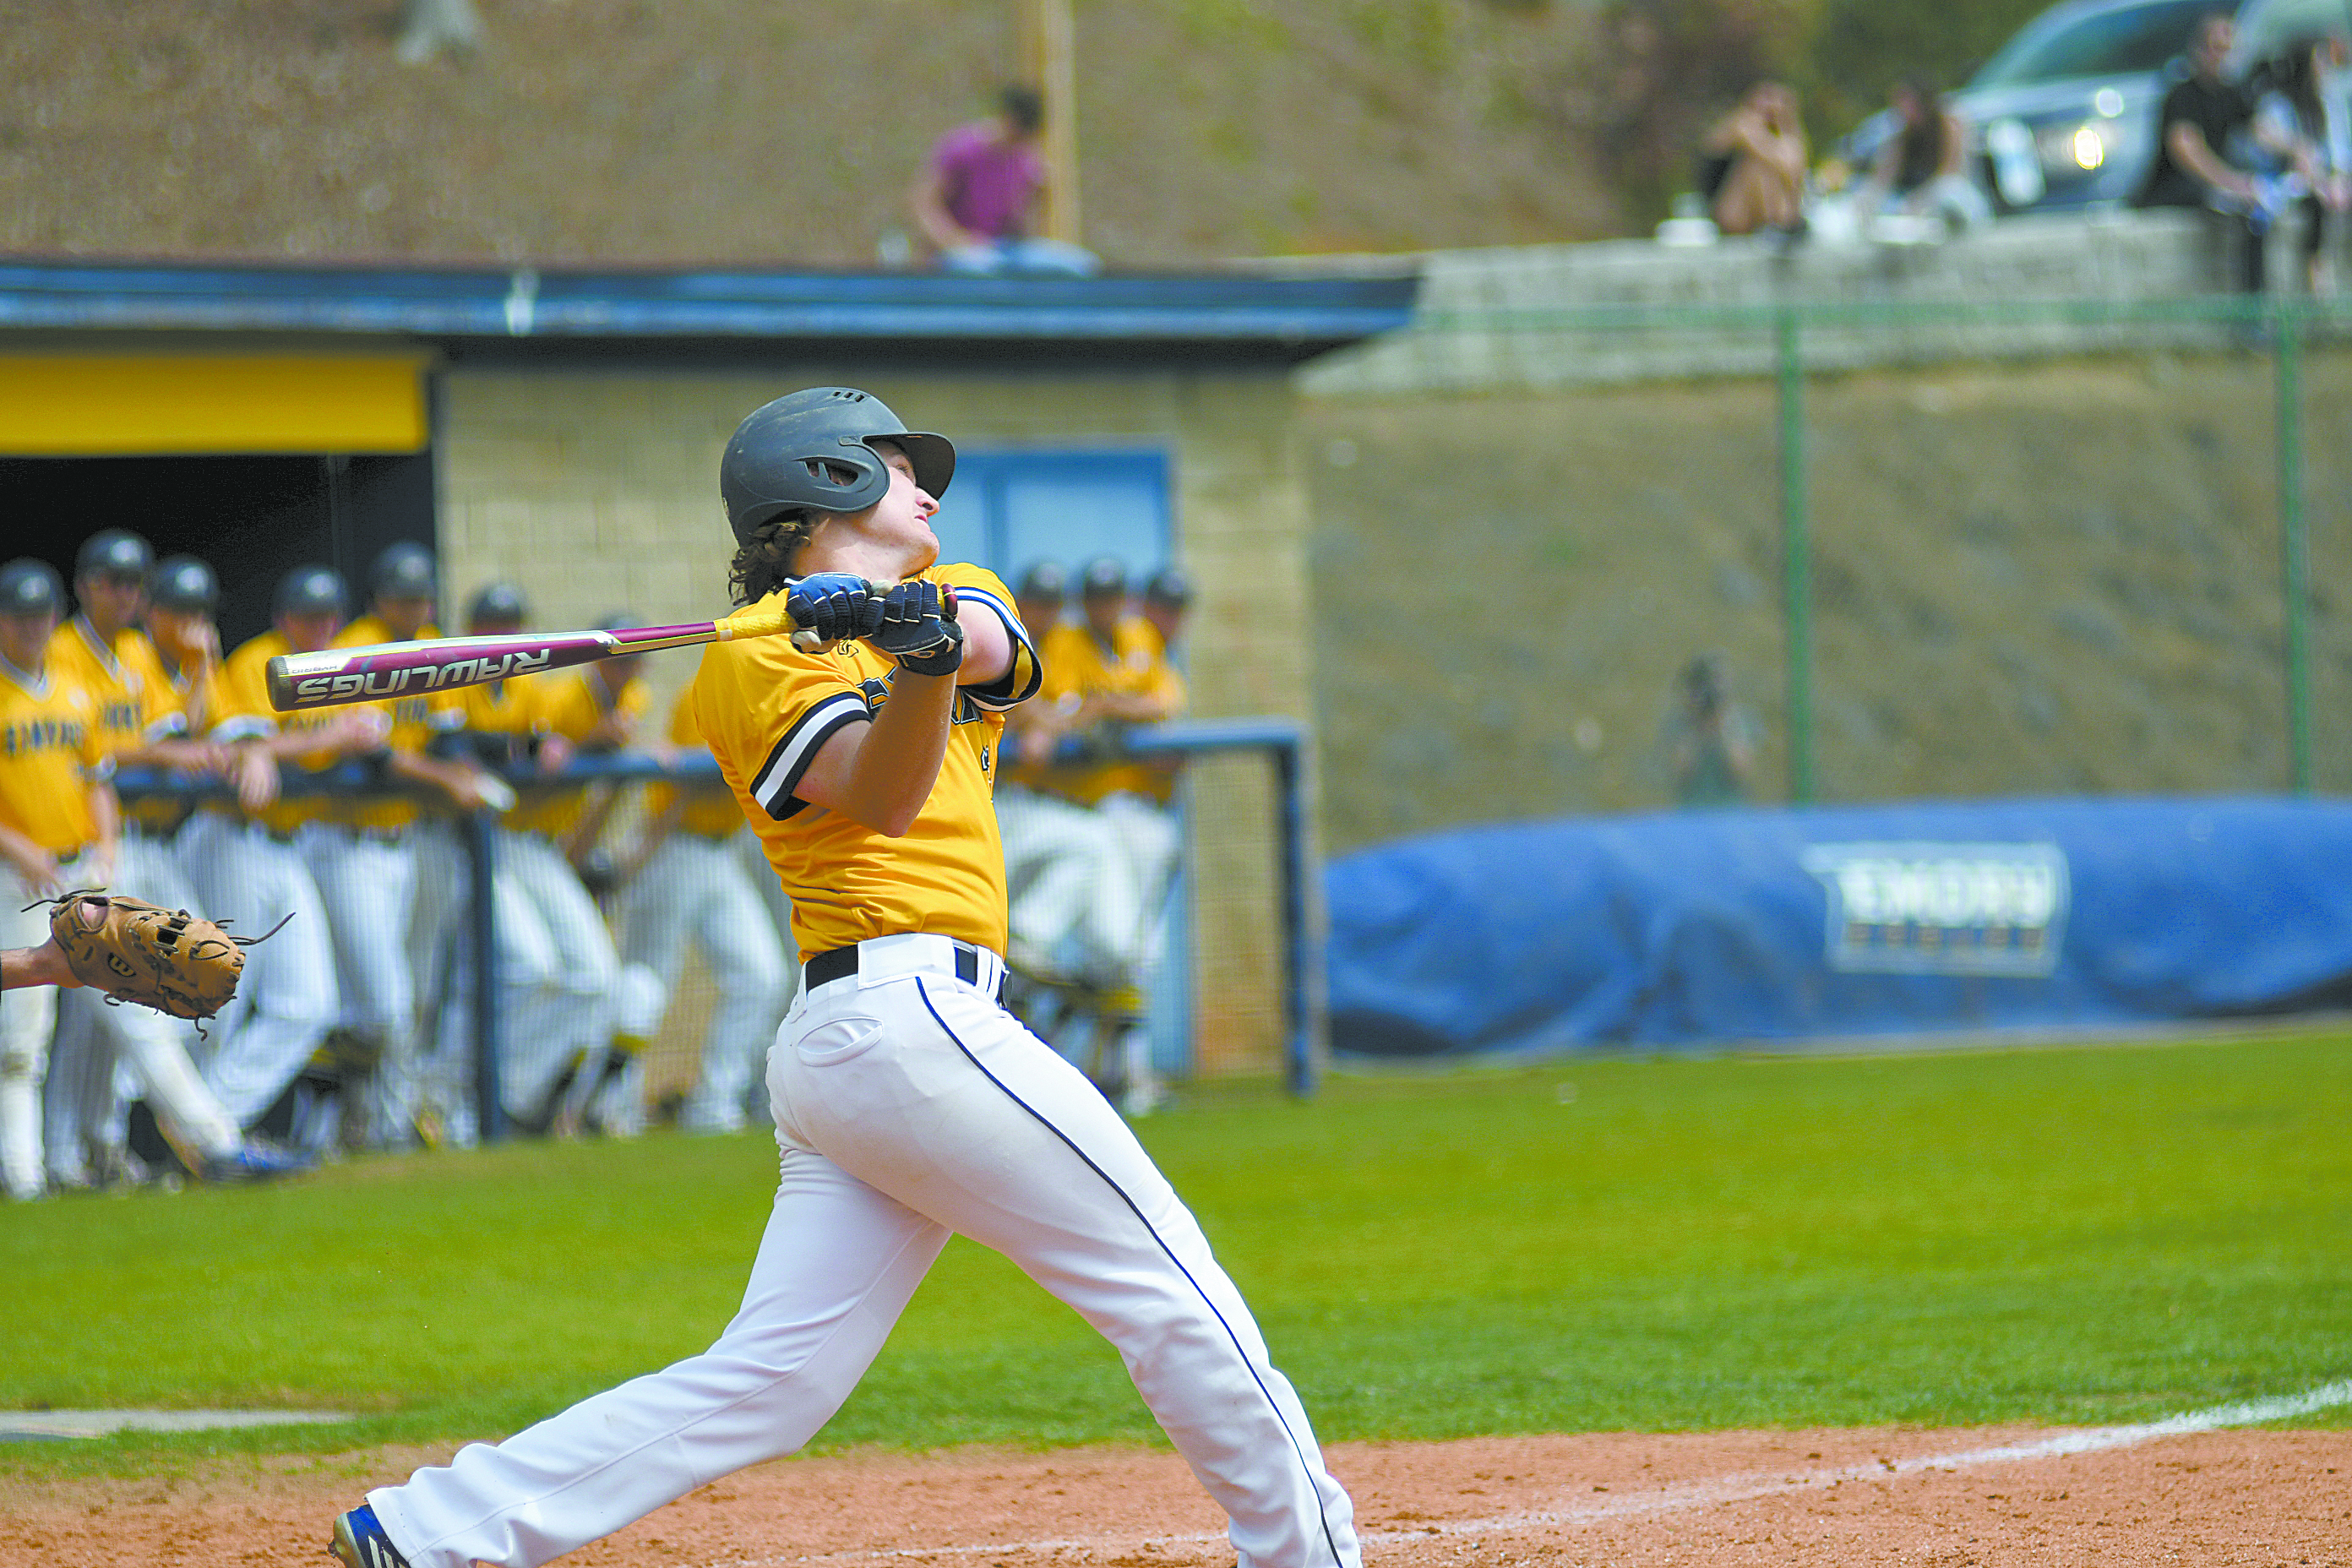 Senior Outfielder Wilson Morgan scored three runs in the Eagles' epic final game against Case Western Reserve (Ohio) that featured six lead changes and a total of 35 runs. Gemy Sethaputra/Senior Staff